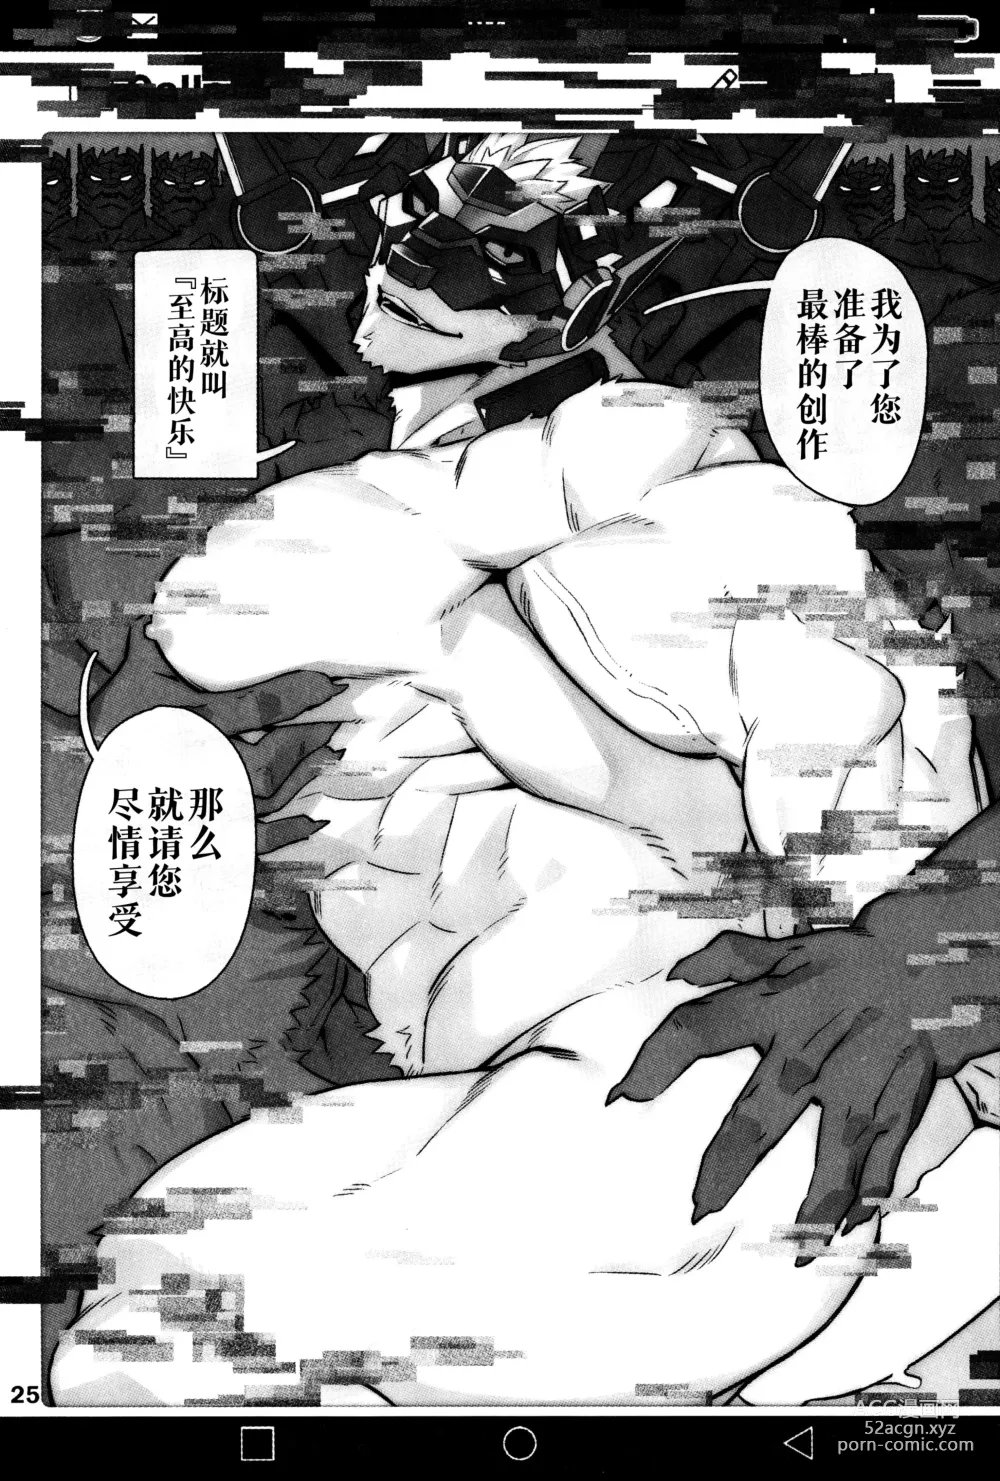 Page 26 of doujinshi SUMMONS GALLERY 2 ｜东京放课后召唤师相册2